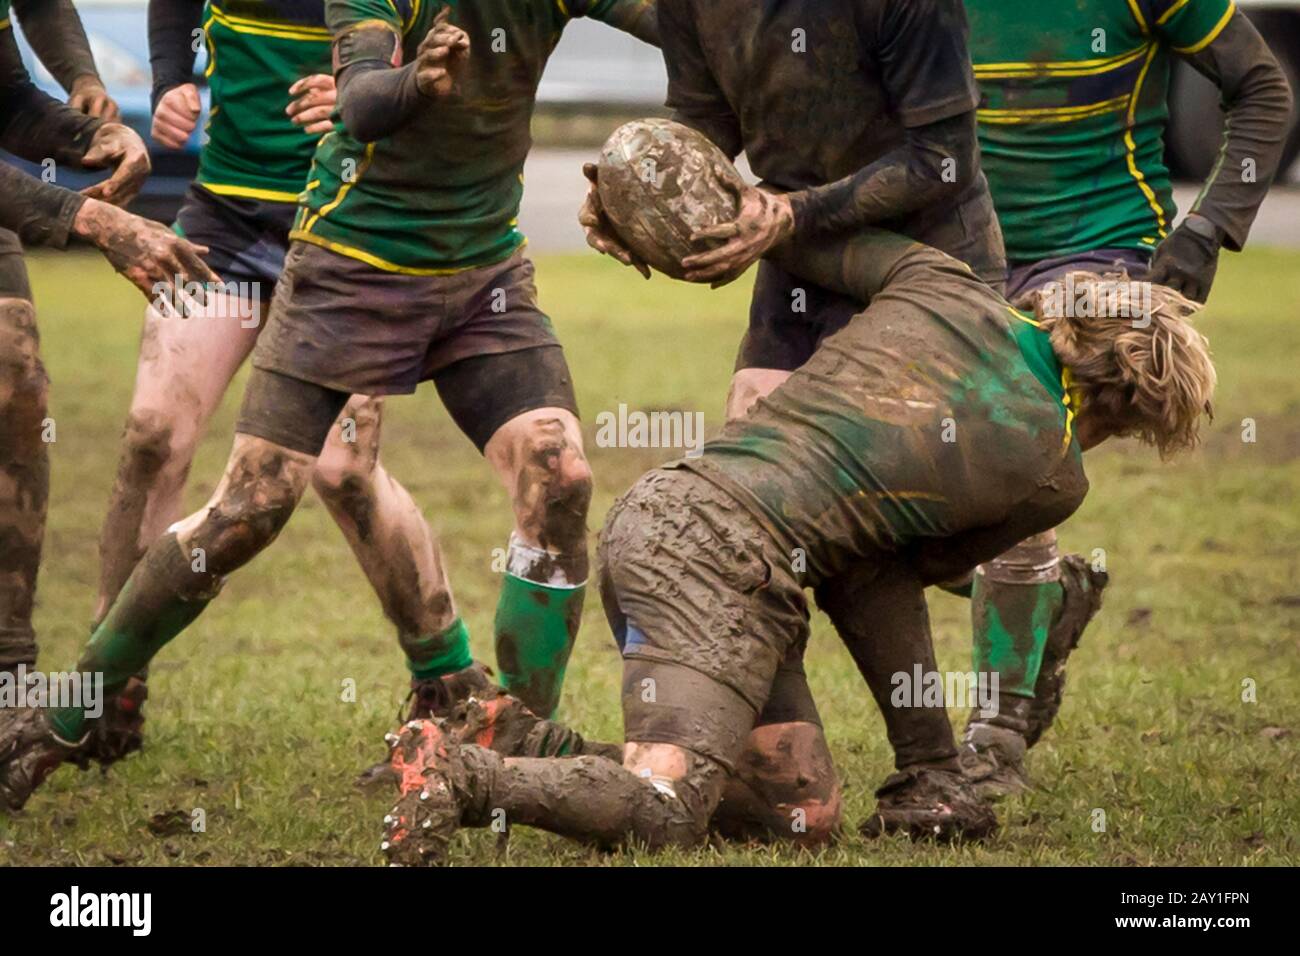 Rugby tackle taking place during an extremely muddy rugby match Stock Photo